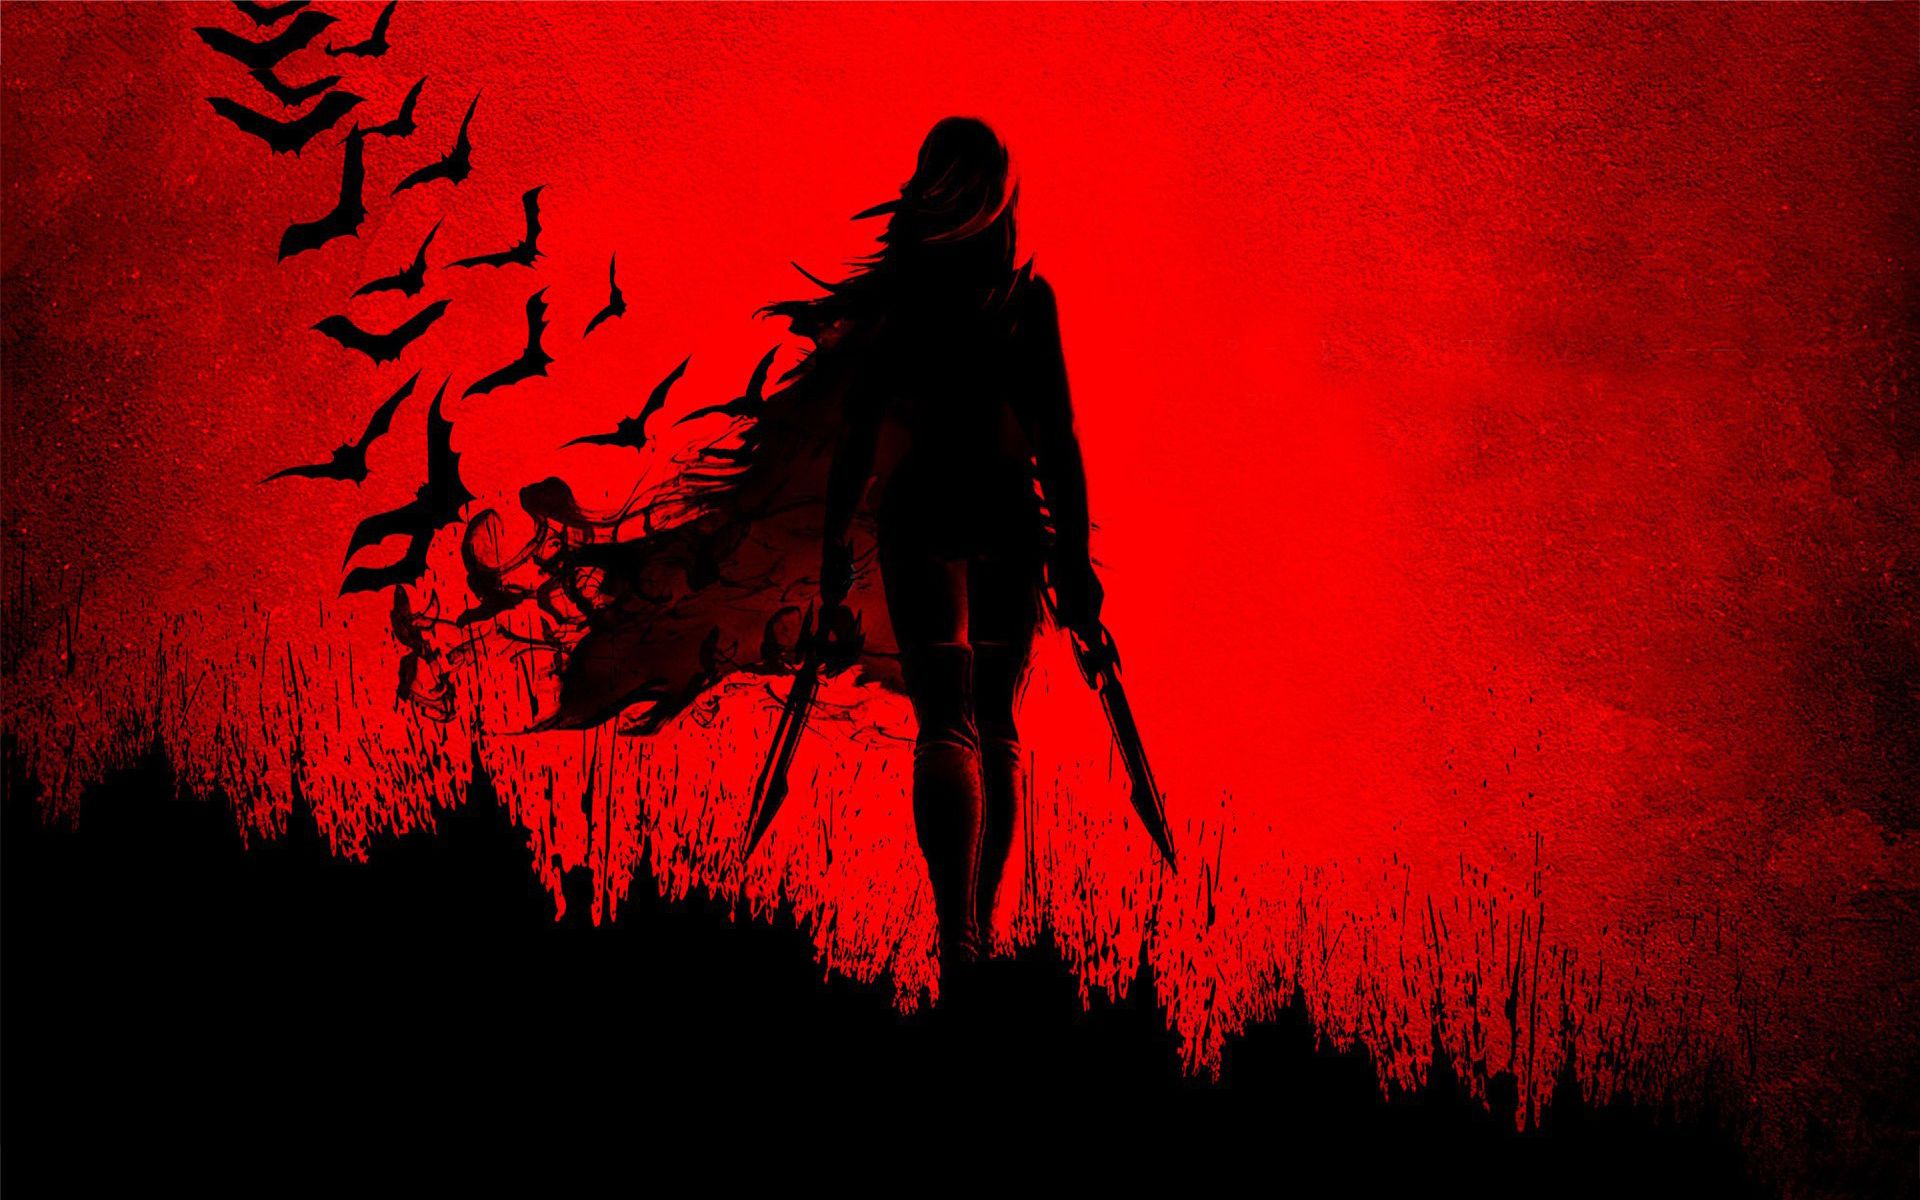 Born in the Shadows. Girl shadow, Eyes wallpaper, Throne of glass